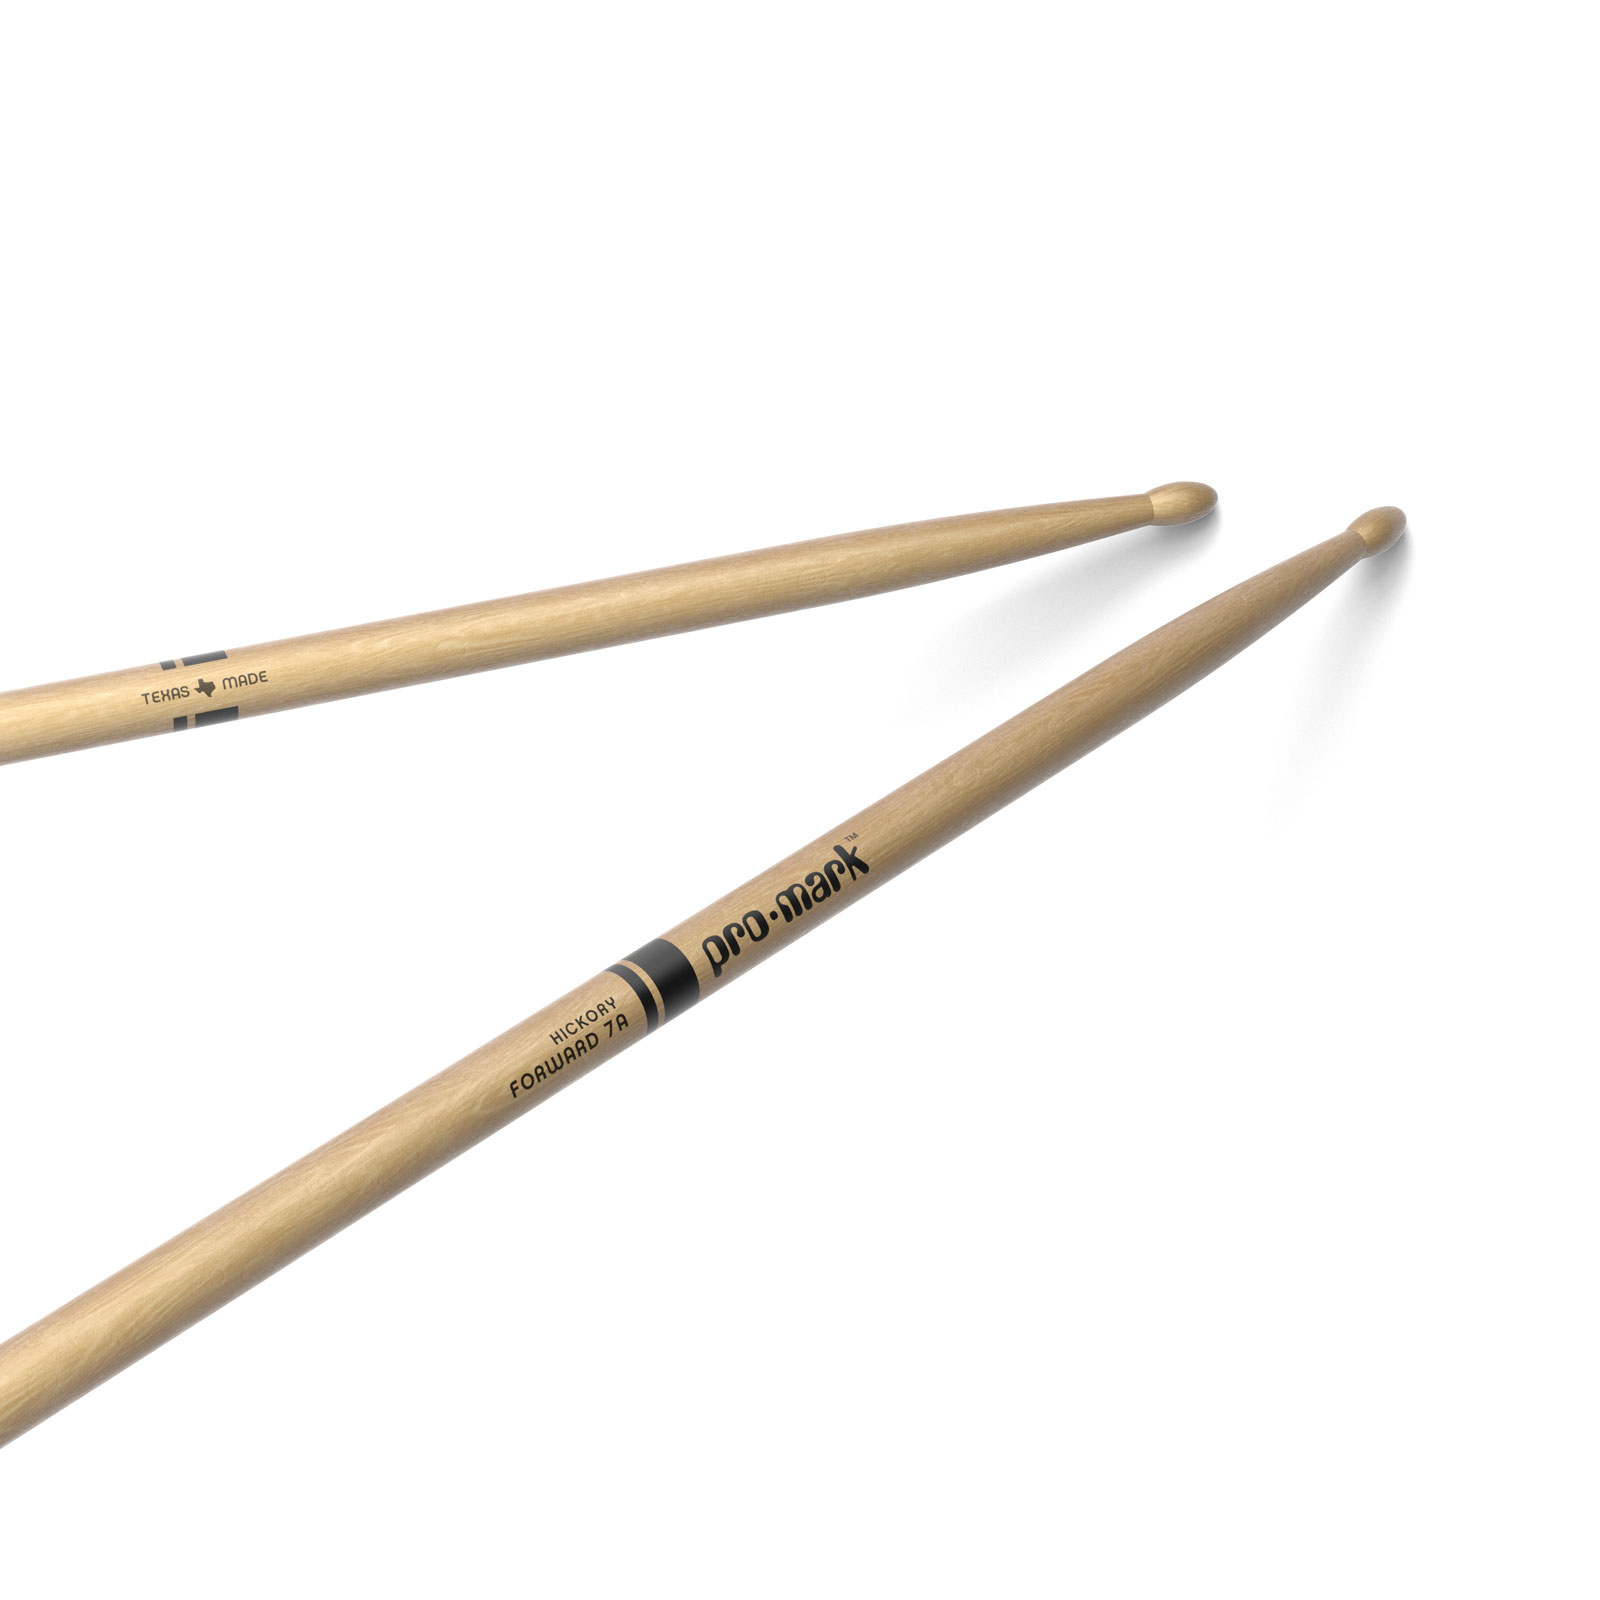 PRO MARK CLASSIC FORWARD 7A HICKORY DRUMSTICK OVAL WOOD TIP